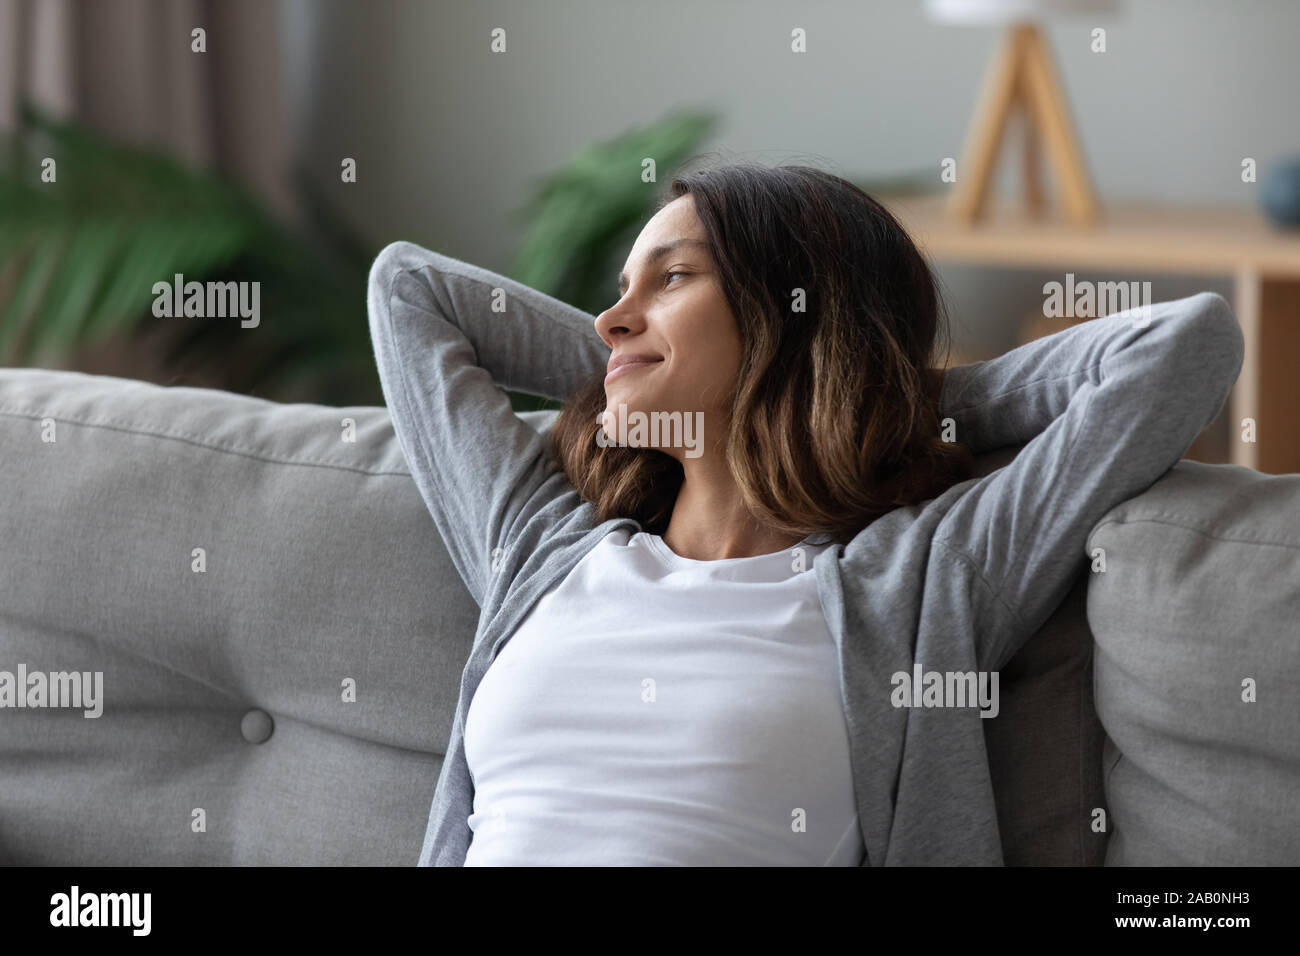 Woman put hands behind head leaned on couch resting indoors Stock Photo